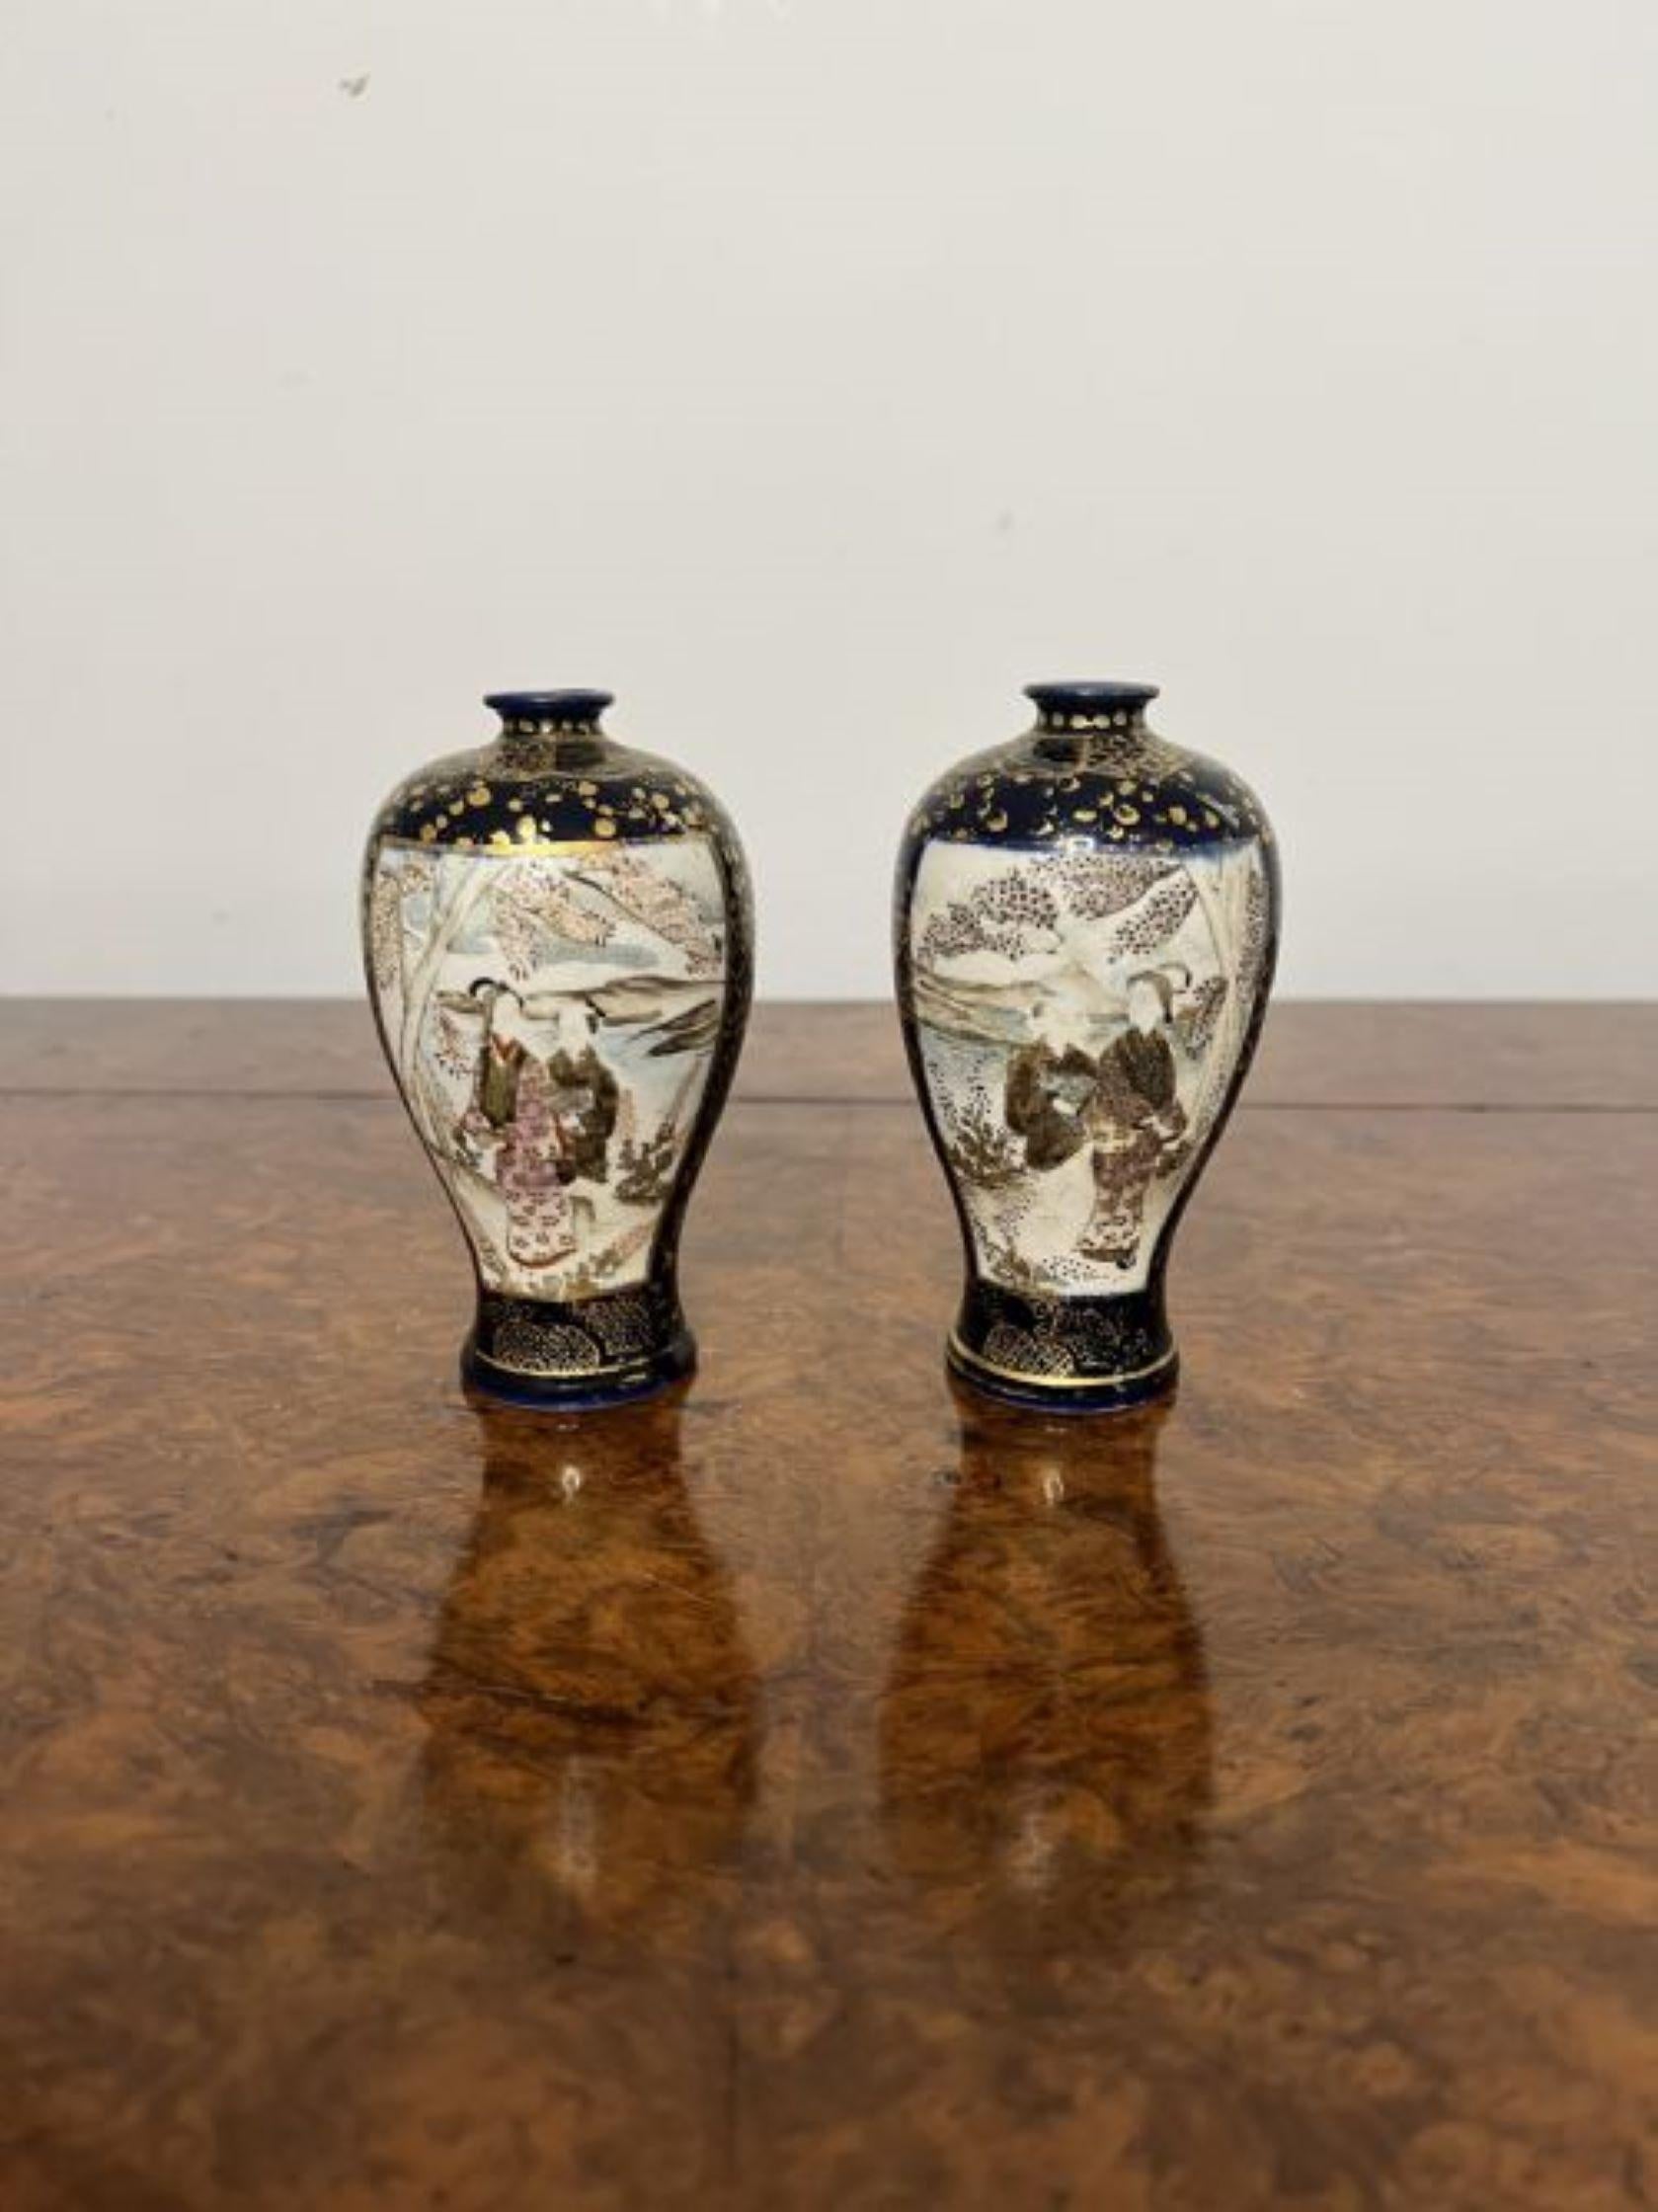 Fantastic quality pair of small antique Japanese satsuma vases having a quality pair of antique Japanese satsuma vases with wonderful hand painted decoration of figural and landscape scenes in blue, gold, brown, green and white colours.